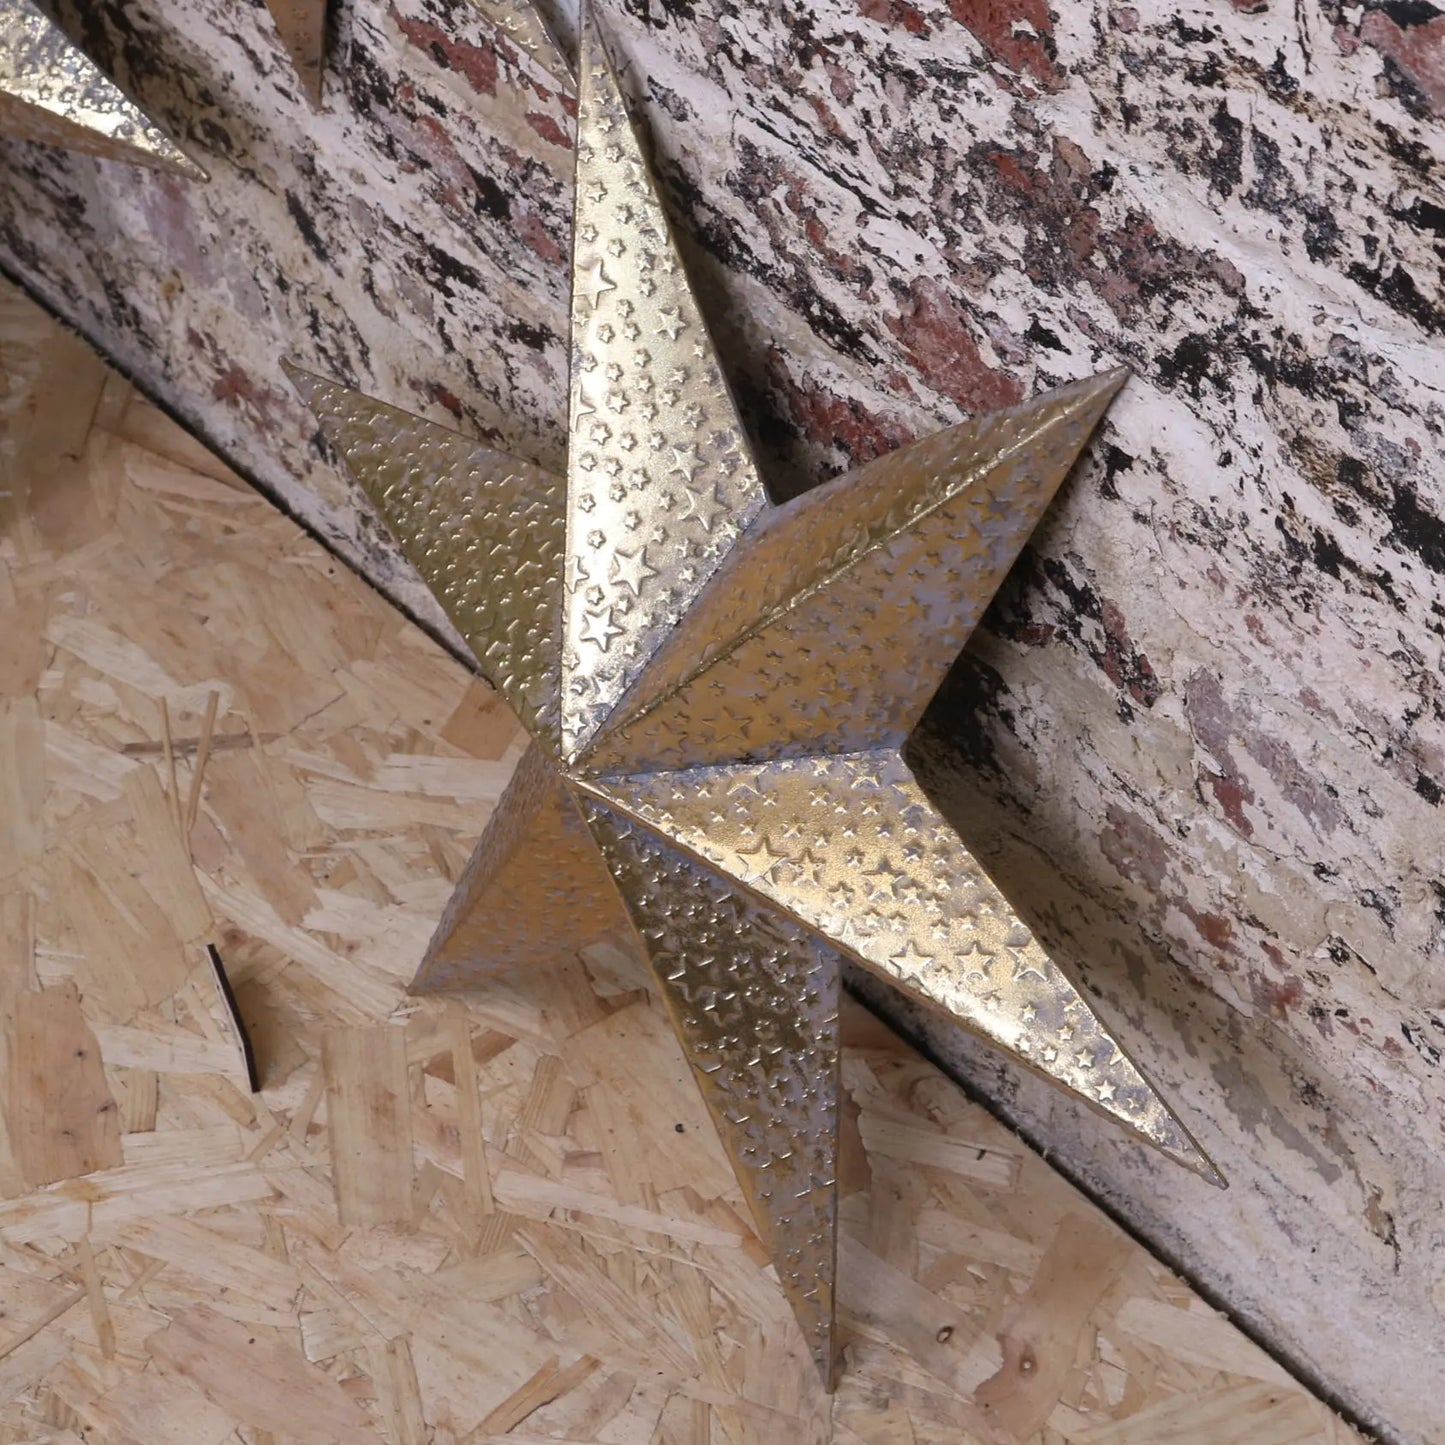 Tara Trio Gold Star Wall Art Accents - Angled Side View